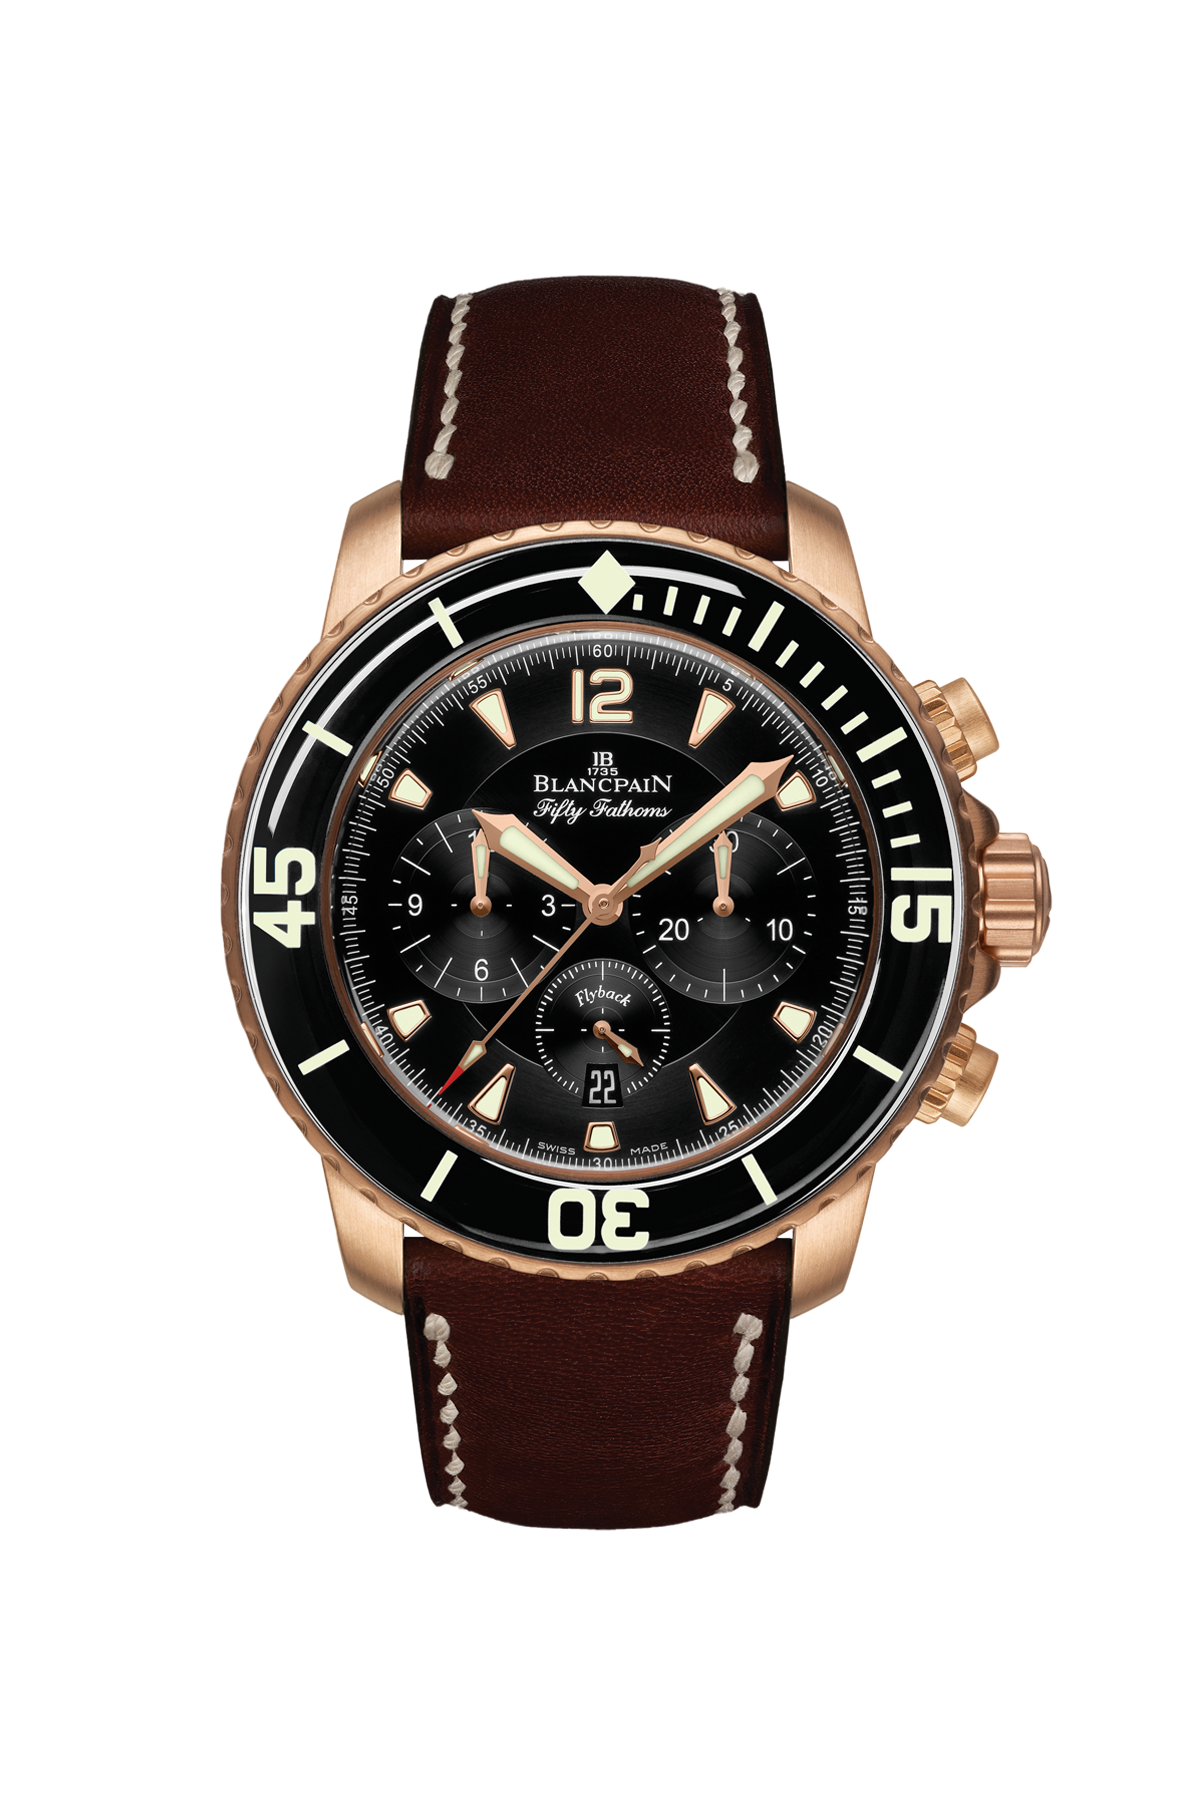 Blancpain Fifty Fathoms Chronographe Flyback